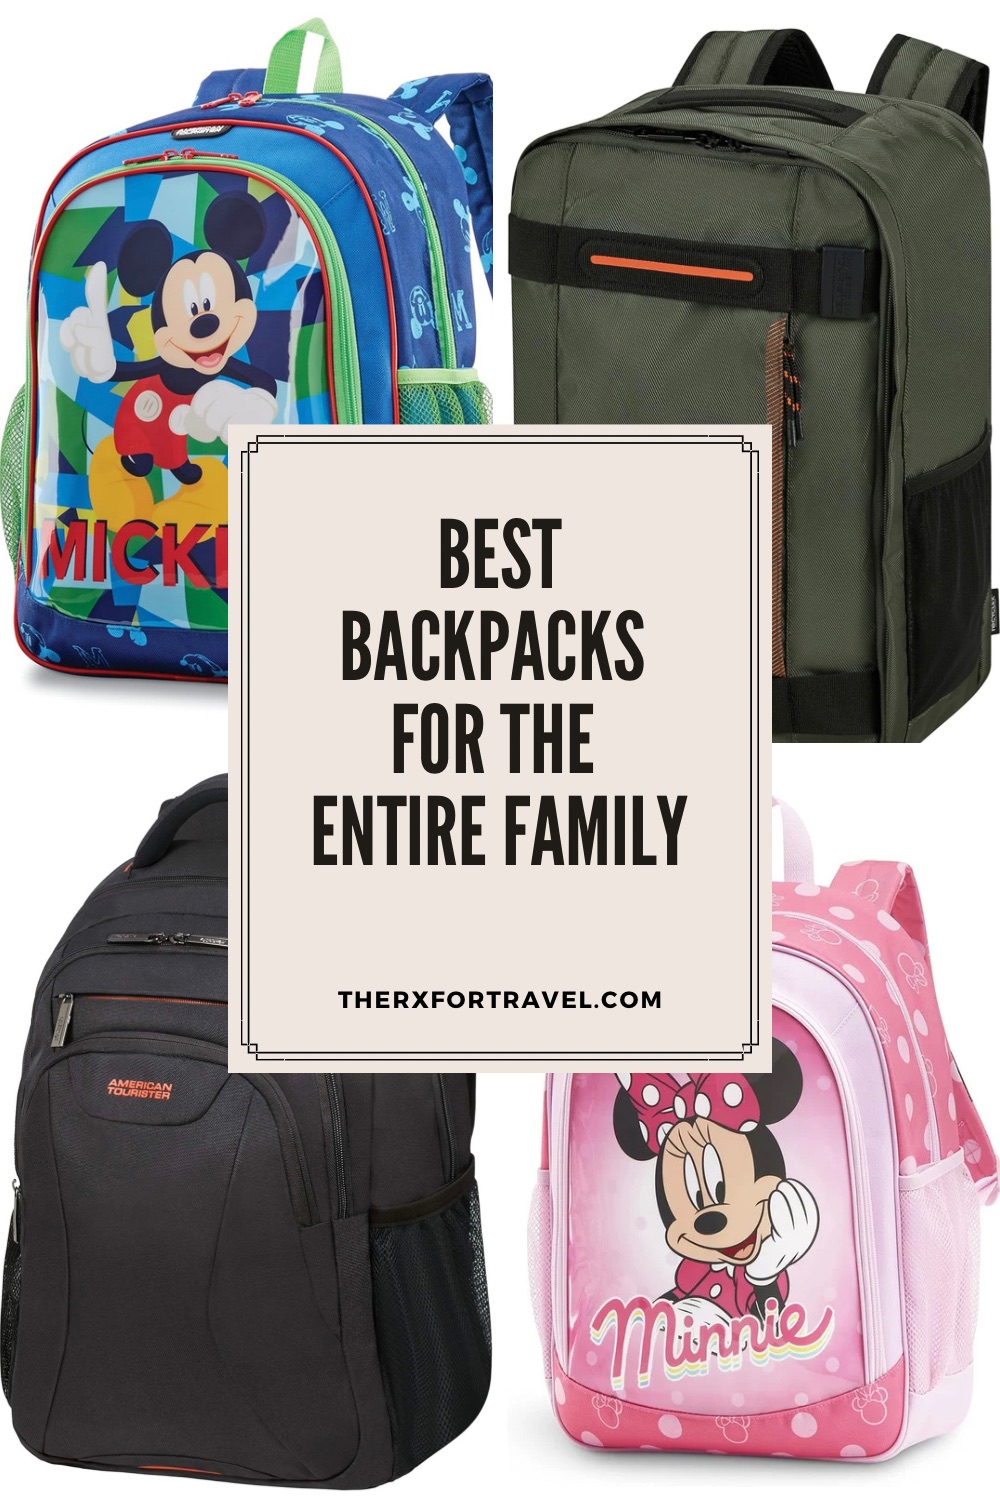 Best American Tourister Backpacks for Travel and School Pin